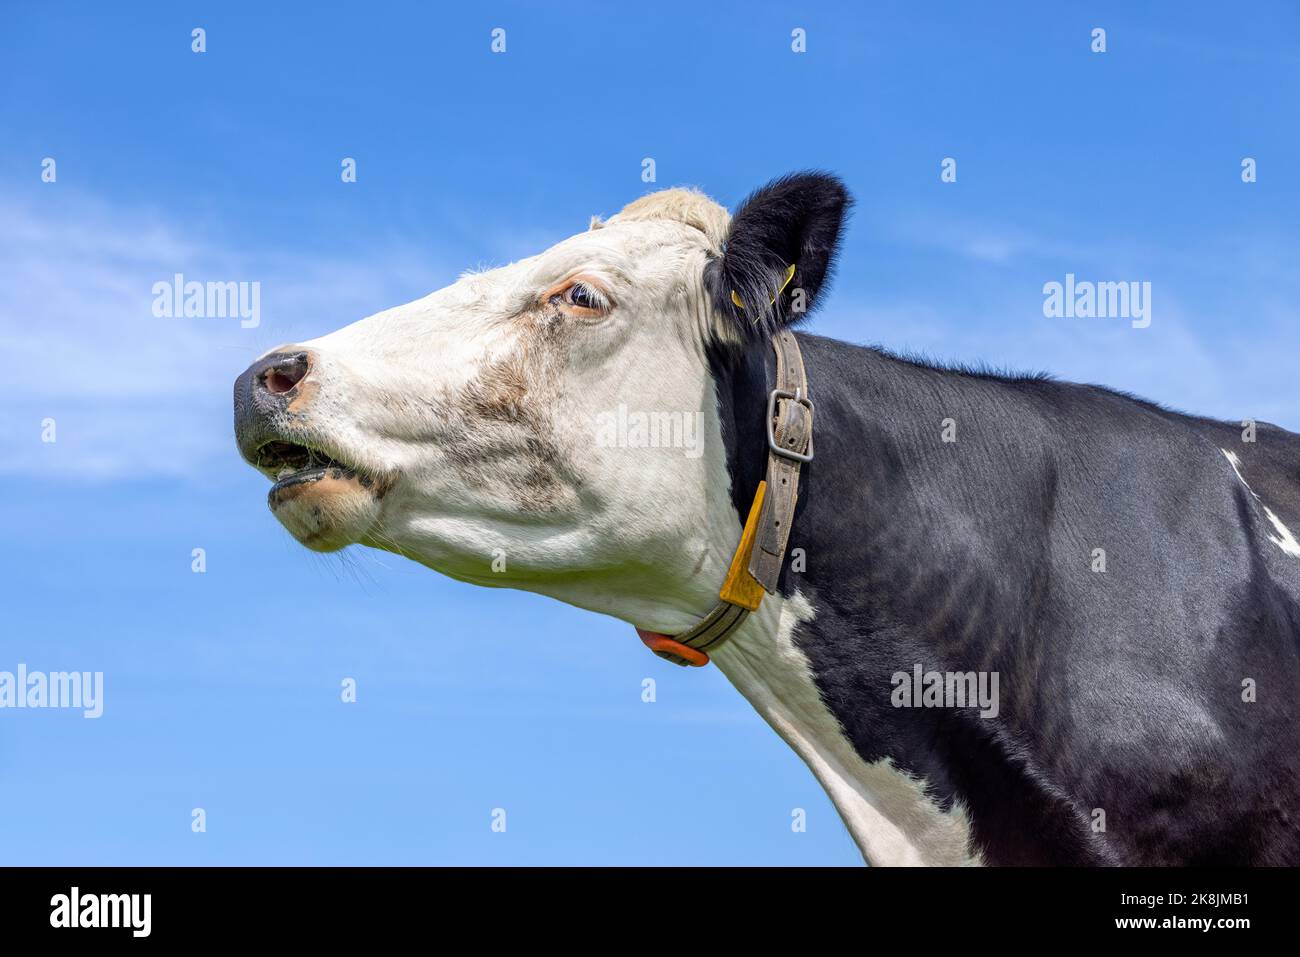 Cow looking with her chin raised high, black and white, head in the air and blue background Stock Photo